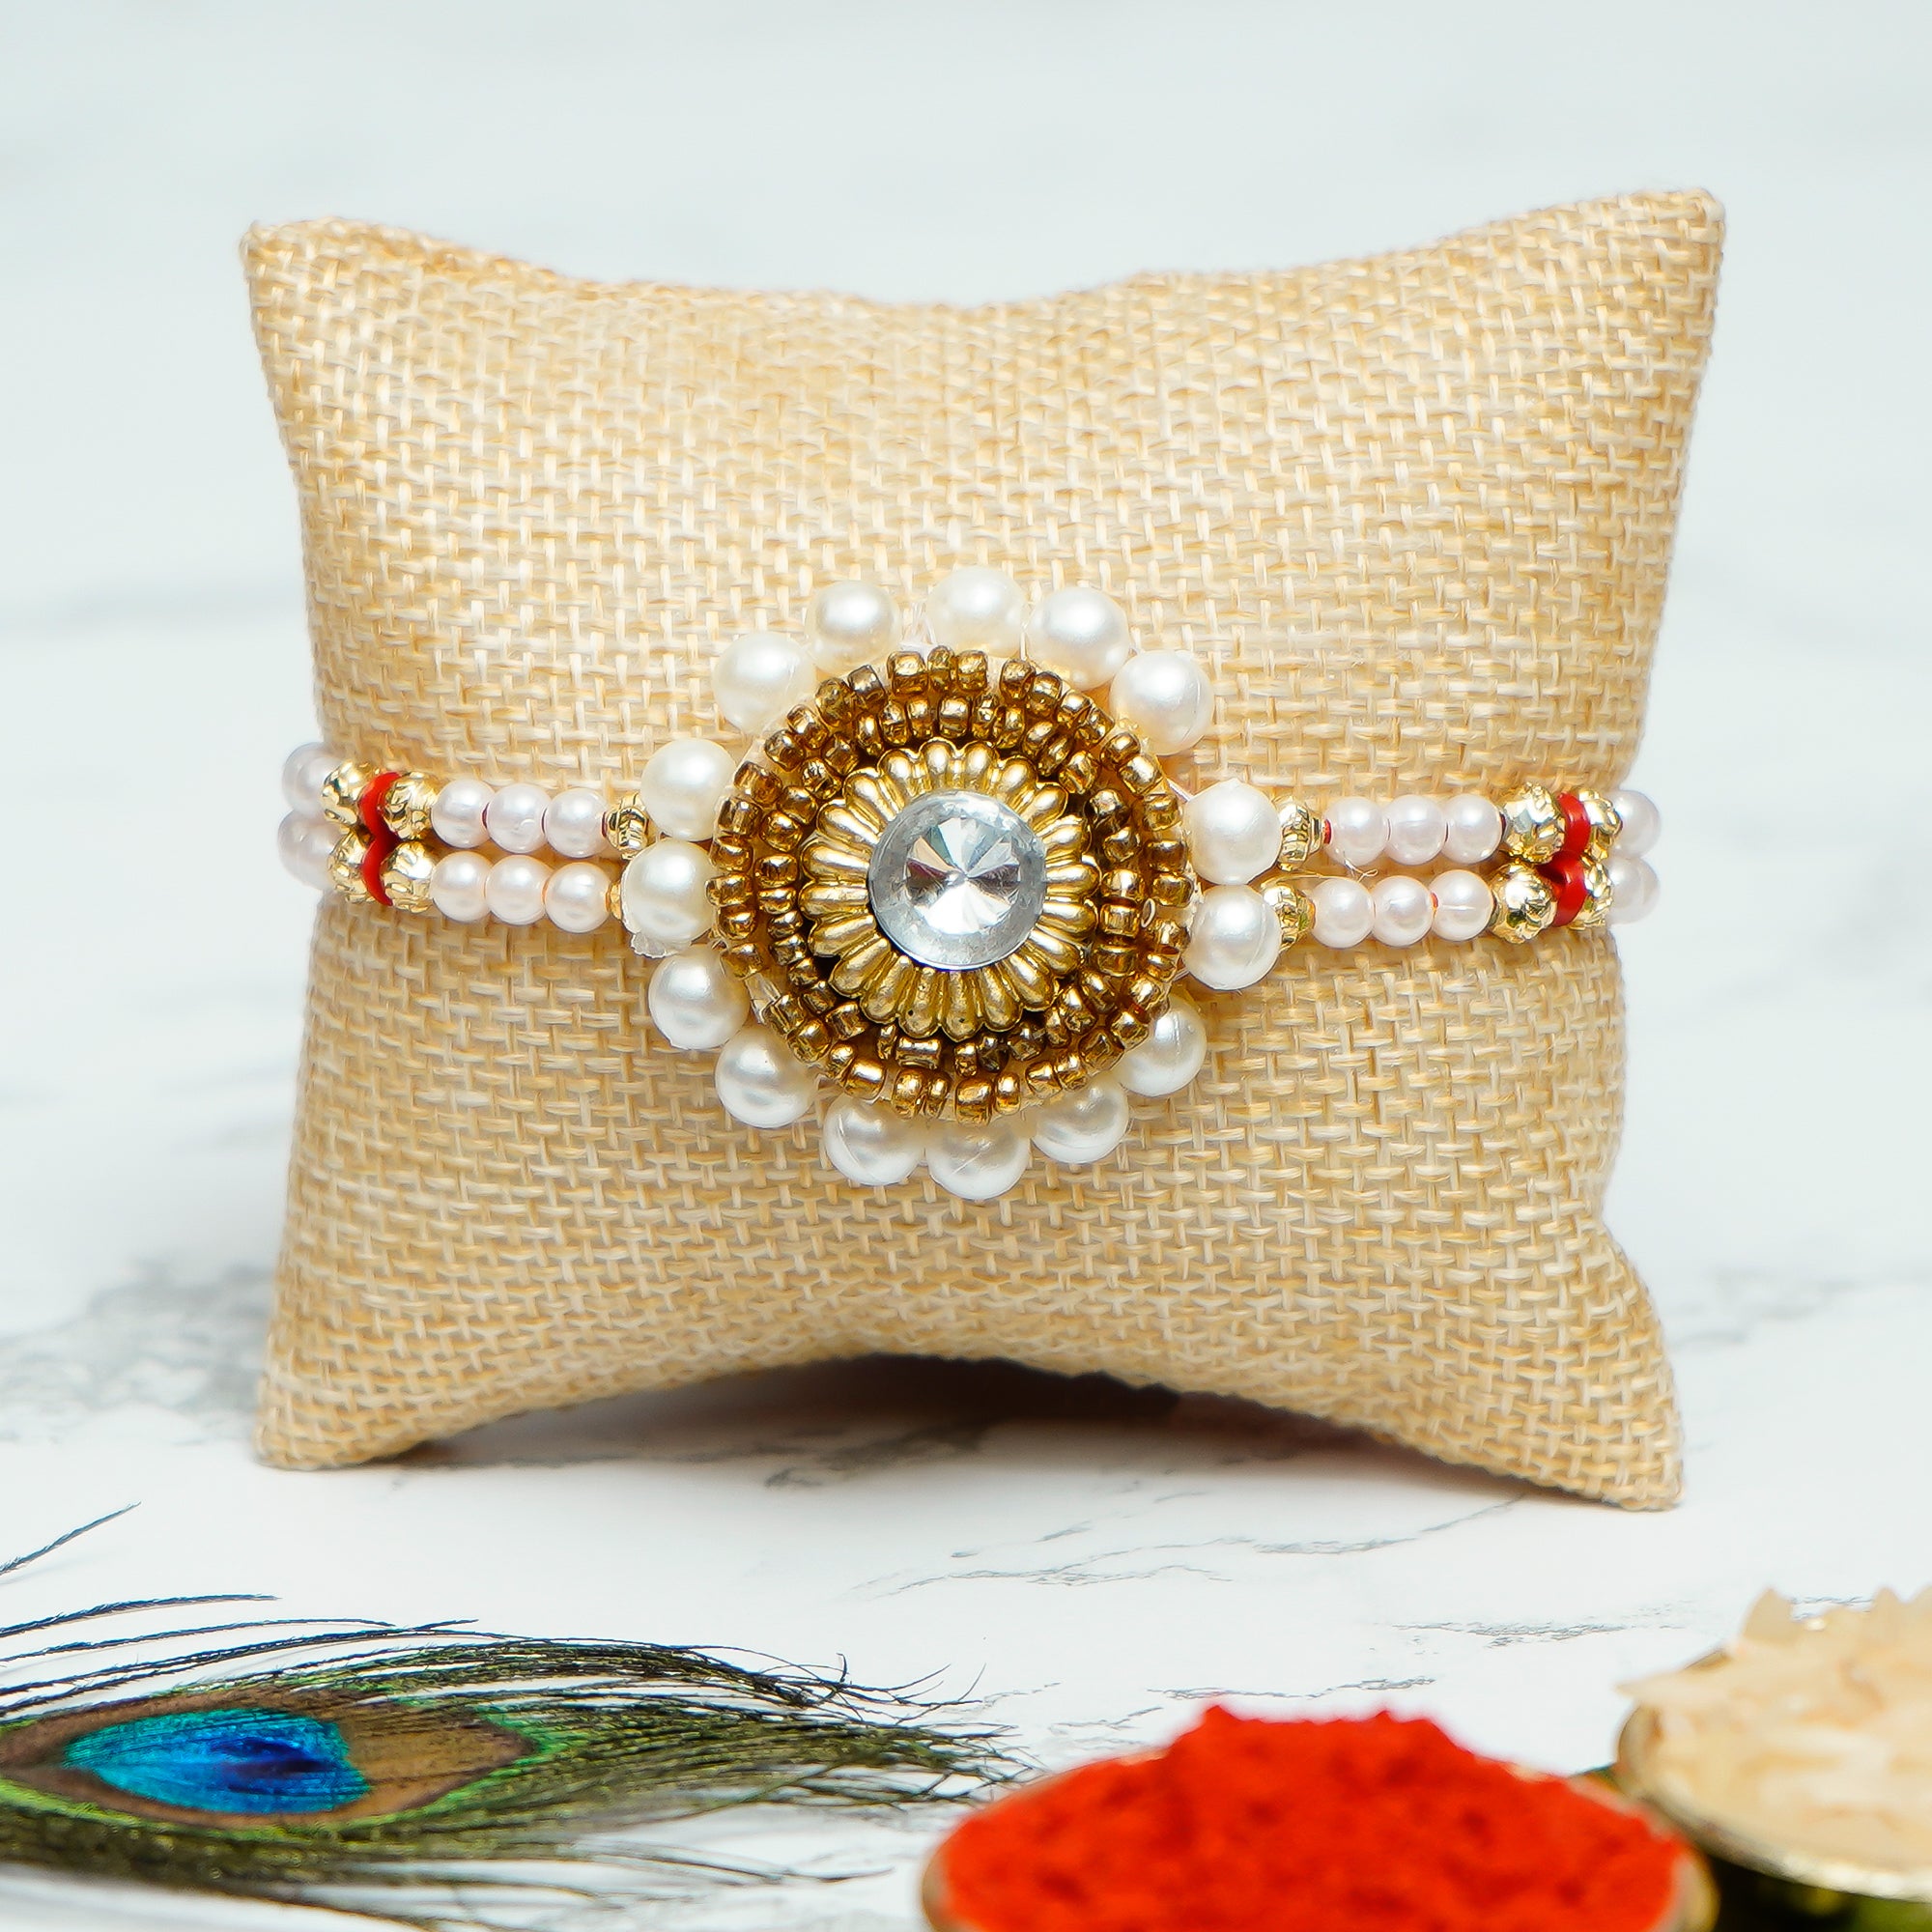 Designer Handcrafted Stone Pearl Rakhi with Golden Handcrafted Palm Buddha Decorative Showpiece with Wooden Base, Fragranced Petals and Tealight and Roli Chawal Pack, Best Wishes Greeting Card 1